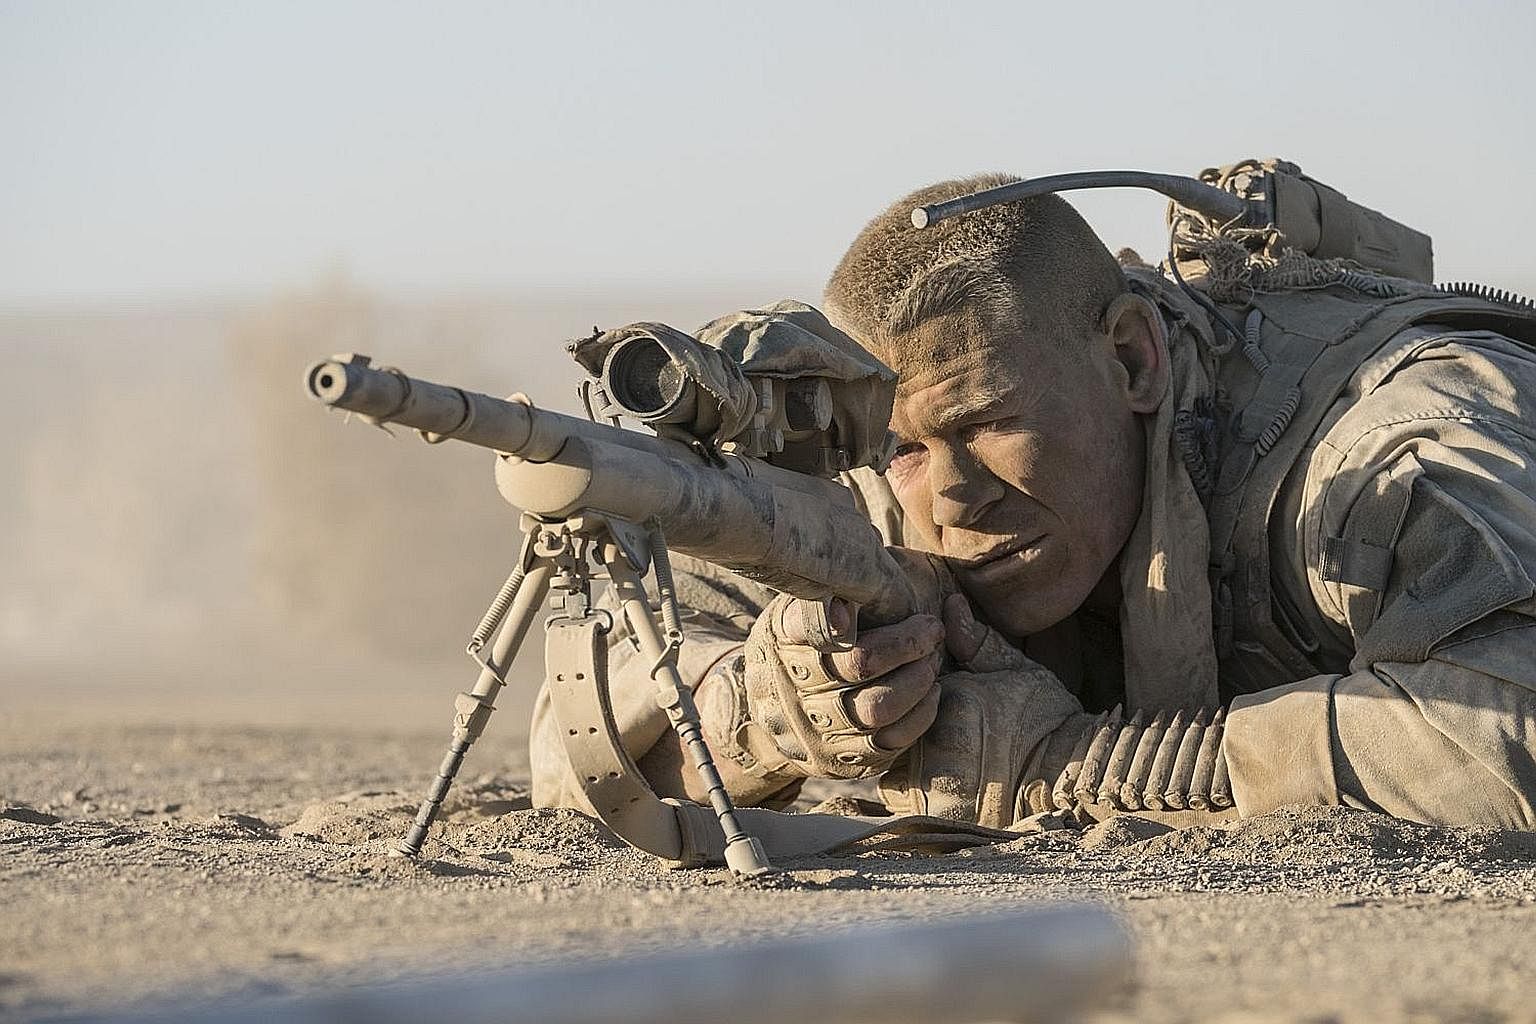 Wrestler-actor John Cena plays an American sniper in Iraq who is pinned down behind a crumbling wall by an unseen Iraqi sniper.